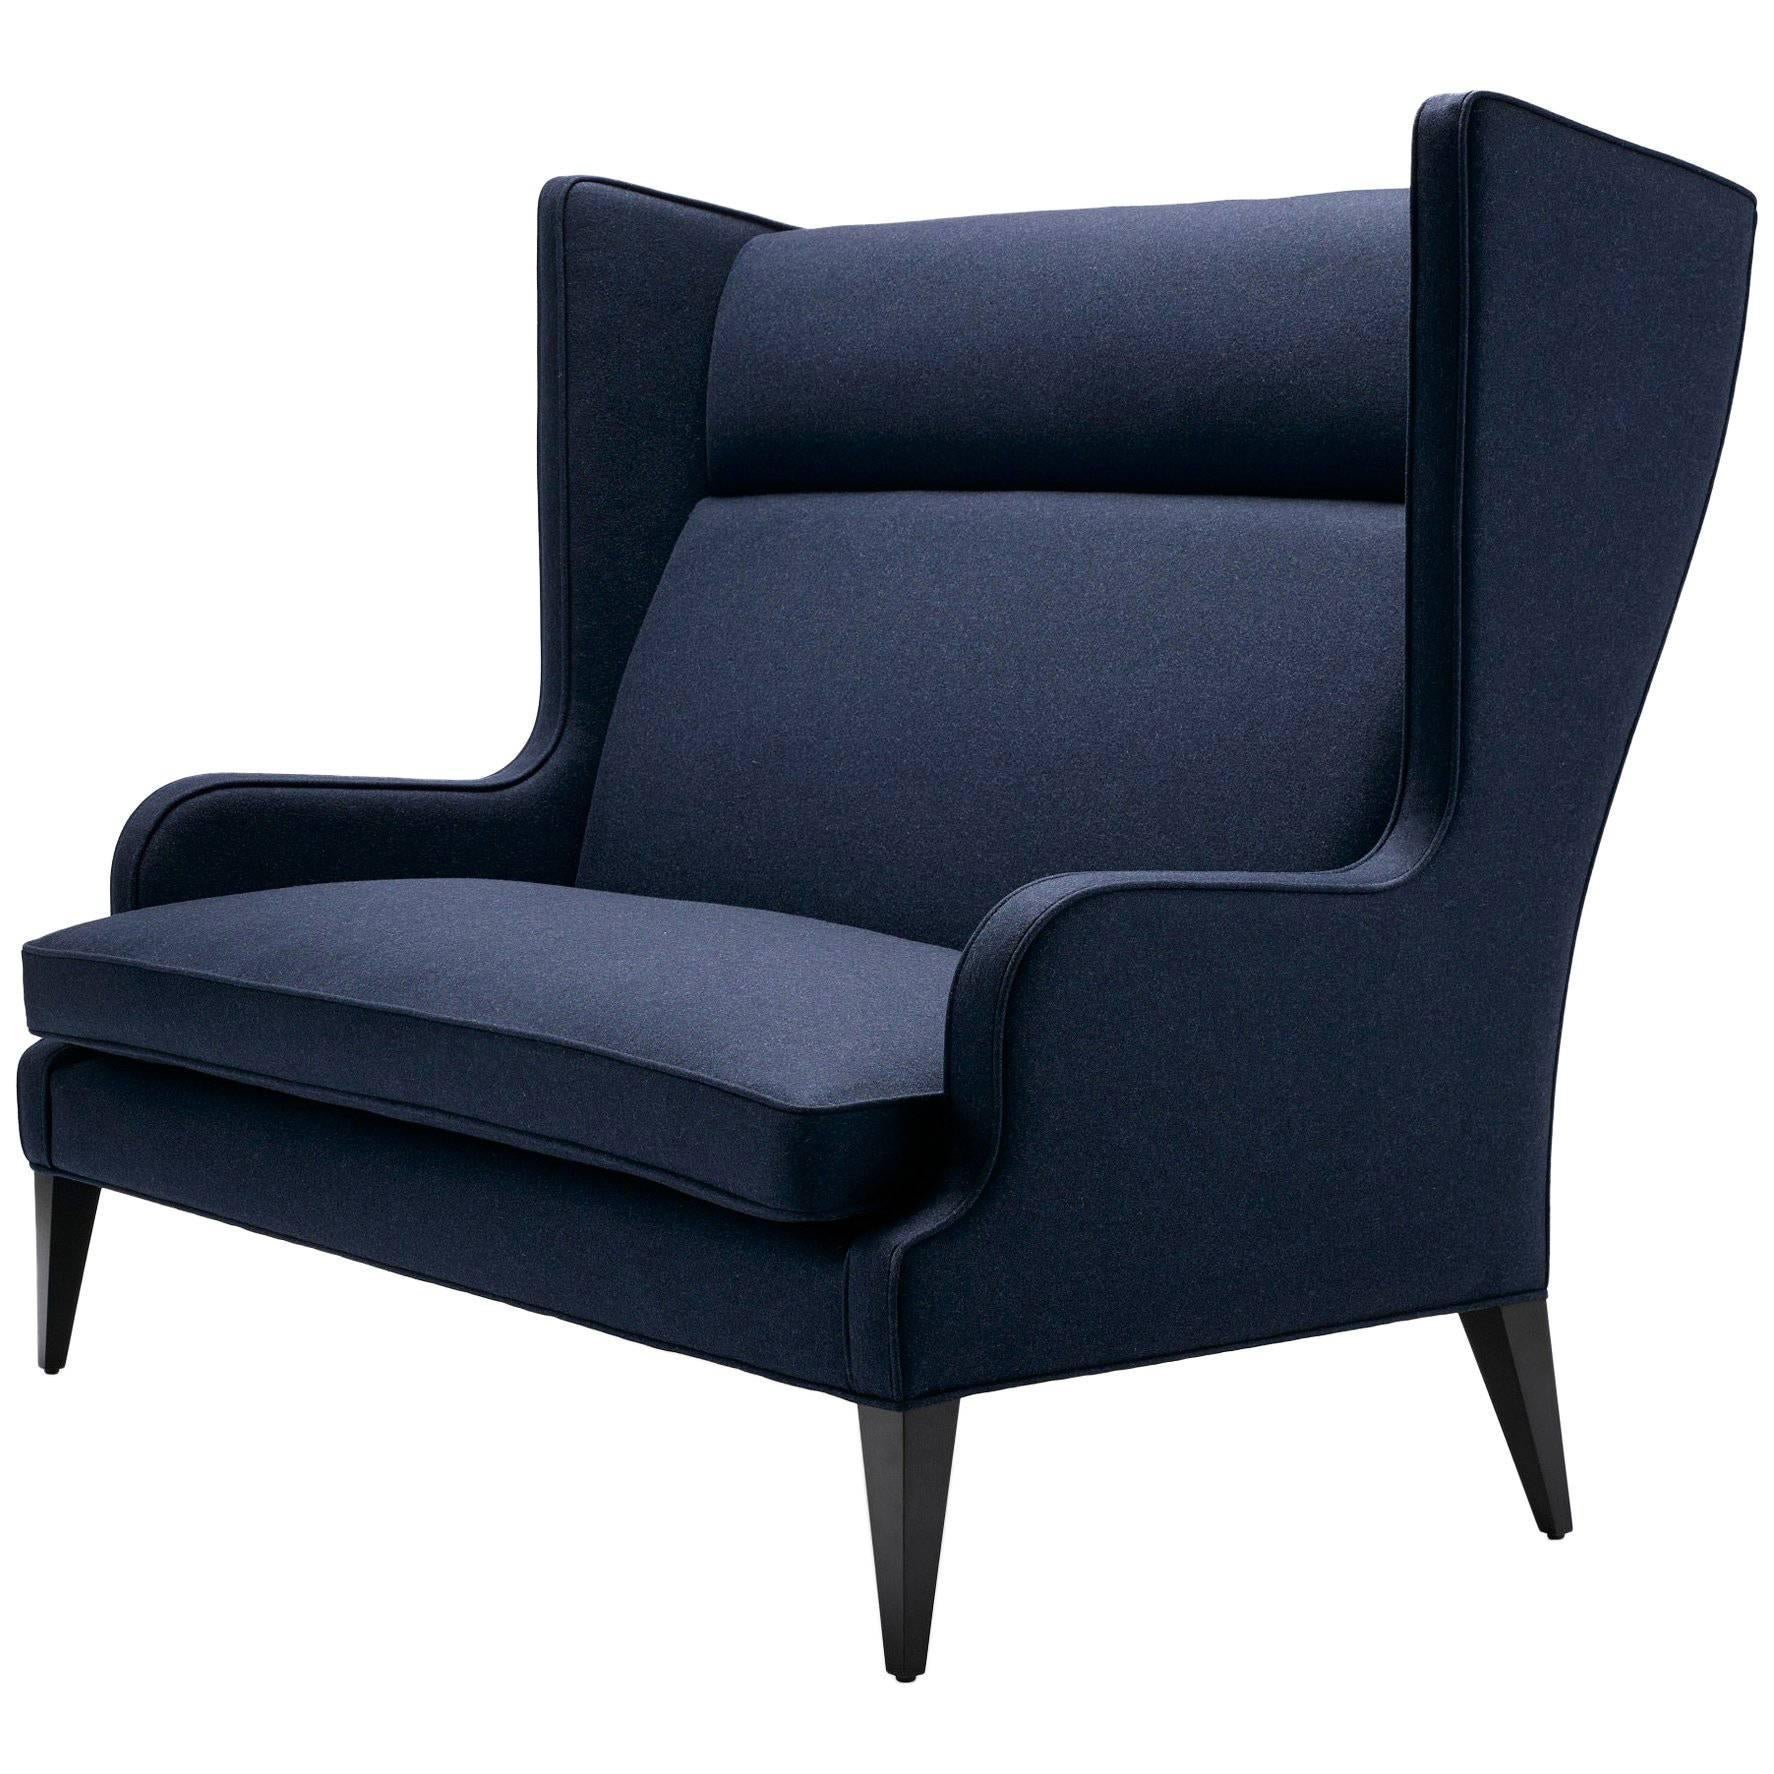 Contemporary Alae Wing Sofa in Arthur's Seat Navy Wool with Black Walnut Legs